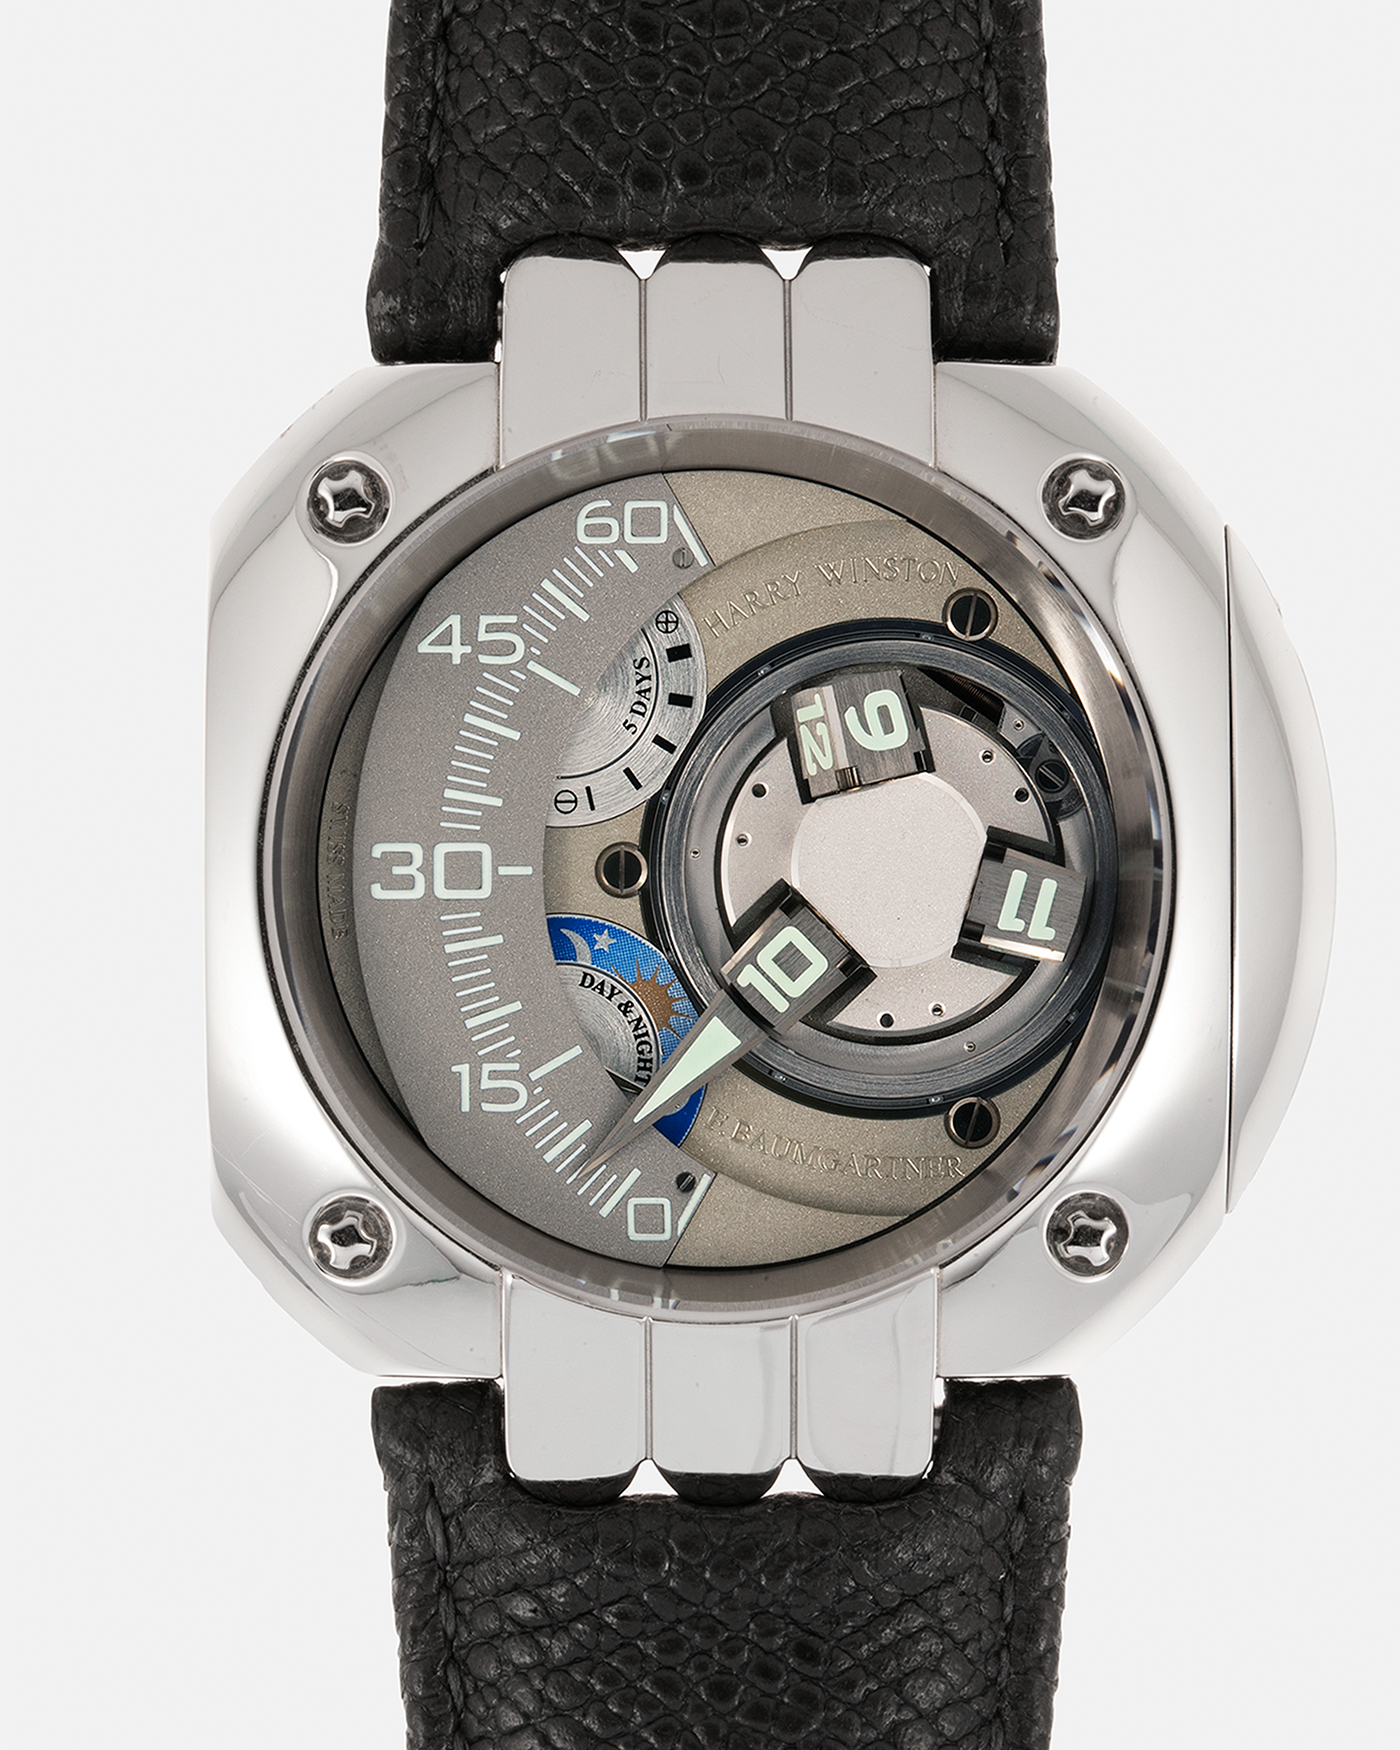 Brand: Harry Winston Year: 2005 Model: Opus V, Limited Edition of 45 pieces in Platinum Material: Platinum 950 Movement: Harry Winston Cal. HW1026 in ARCAP Alloy, Manual-Winding Case Diameter: 50mm Strap: Philips Grey Calf Leather Strap with Signed Platinum Tang Buckle